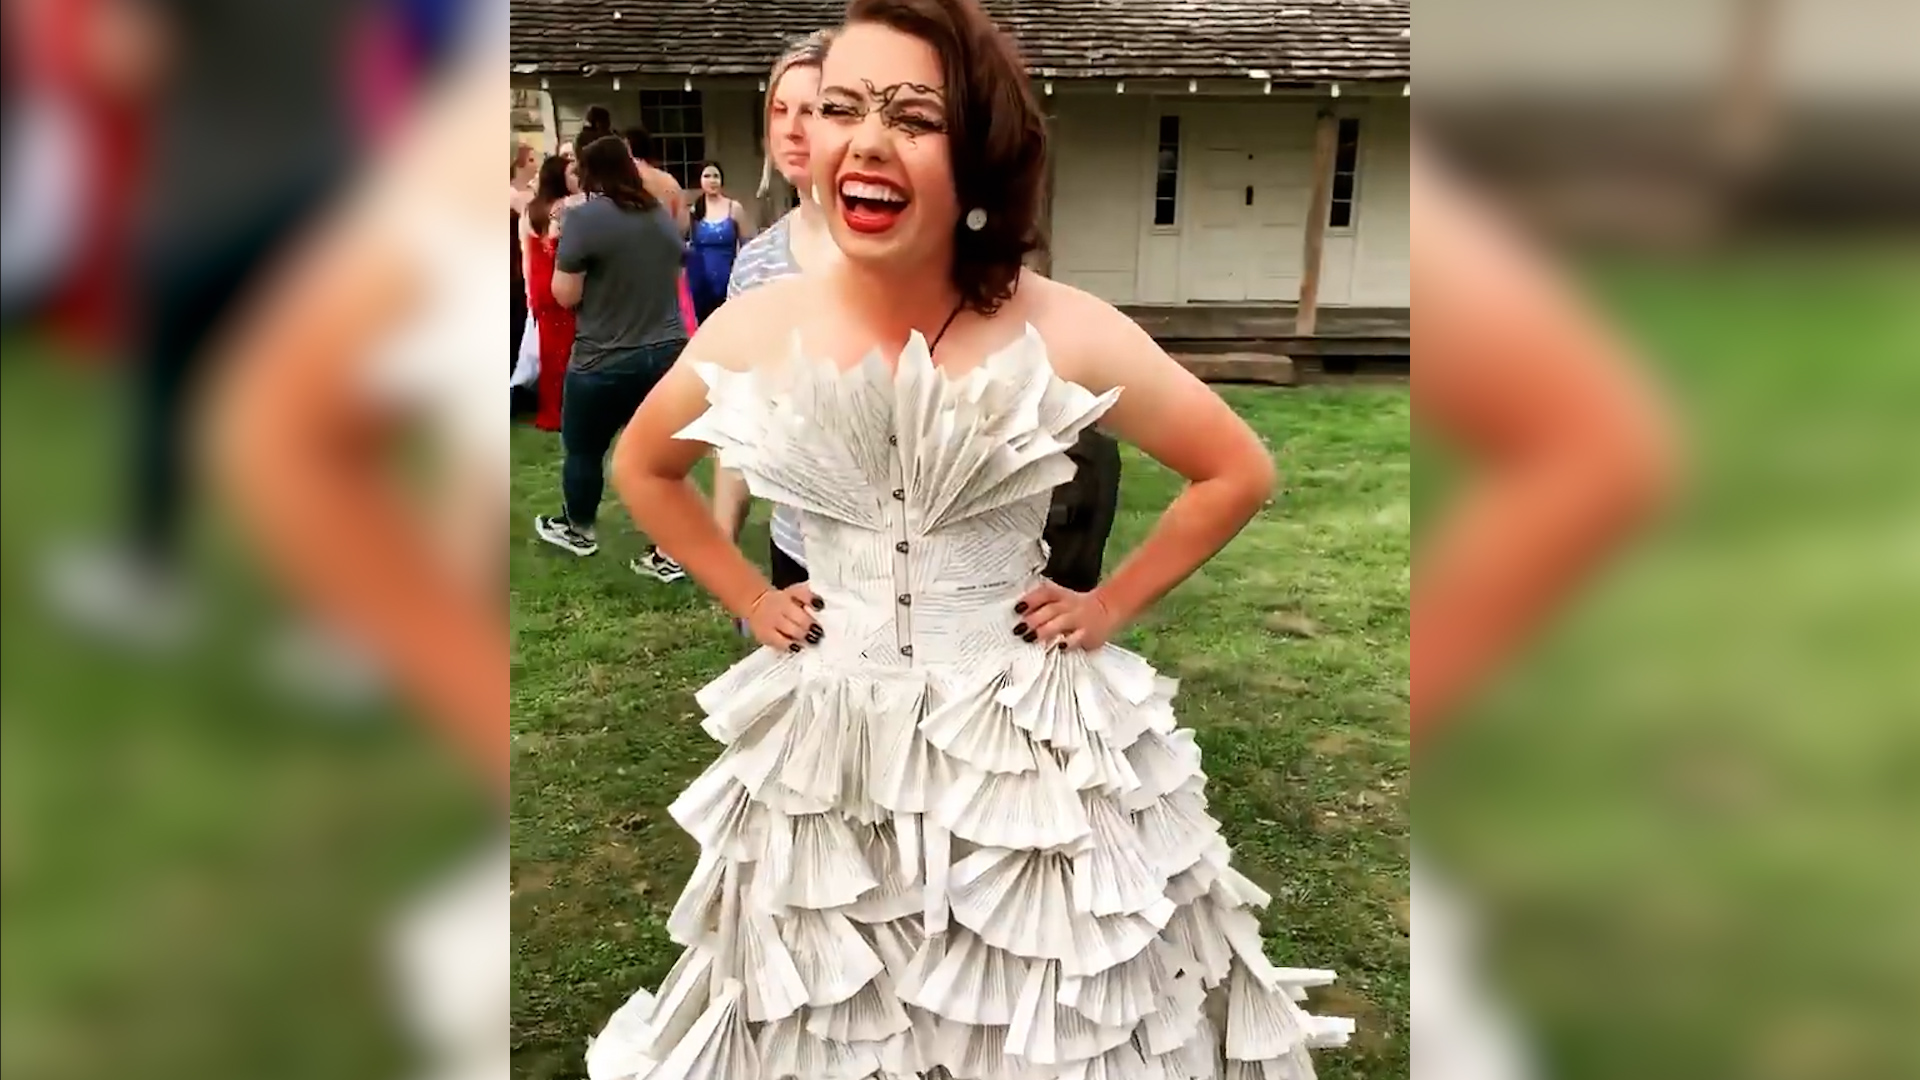 Video of the Day: High schooler creates prom dress from Harry Potter ...